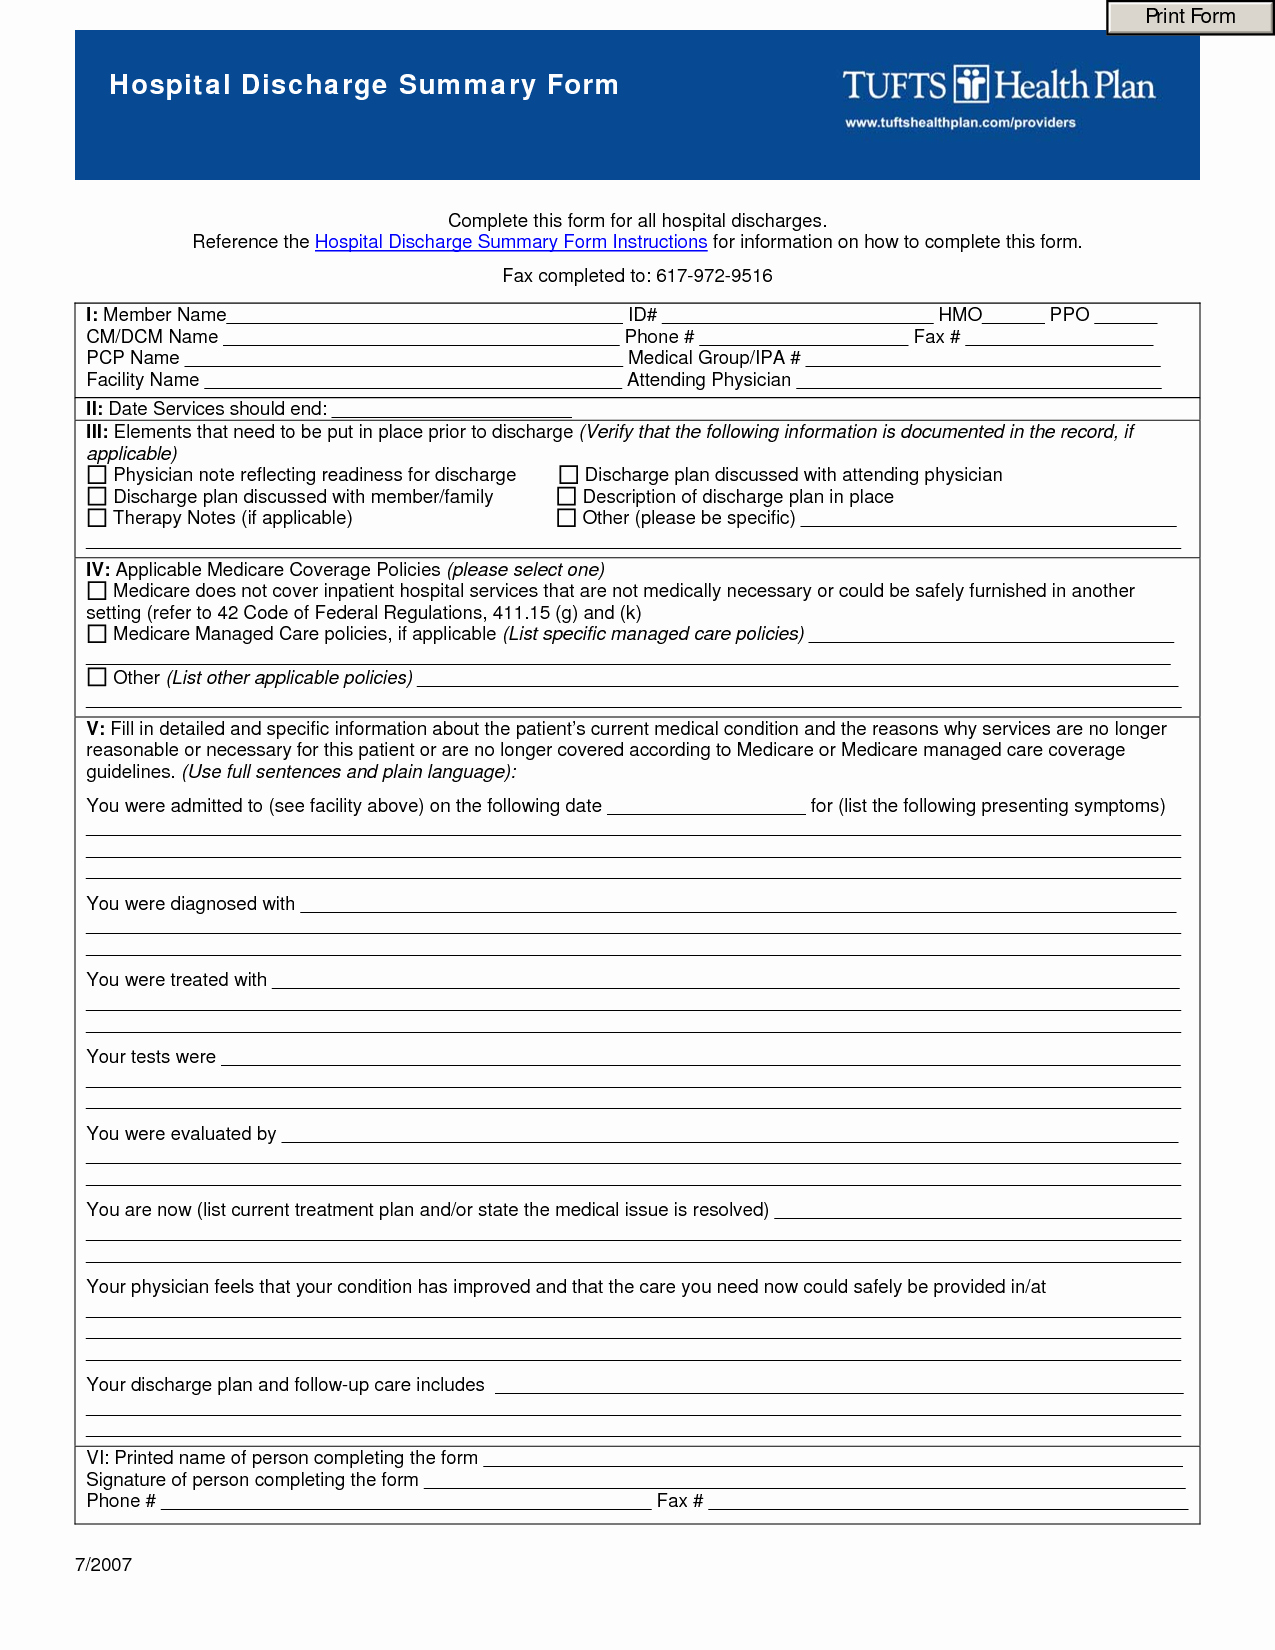 Hospital Discharge form Template Awesome Sample Hospital Discharge forms Blank Walls